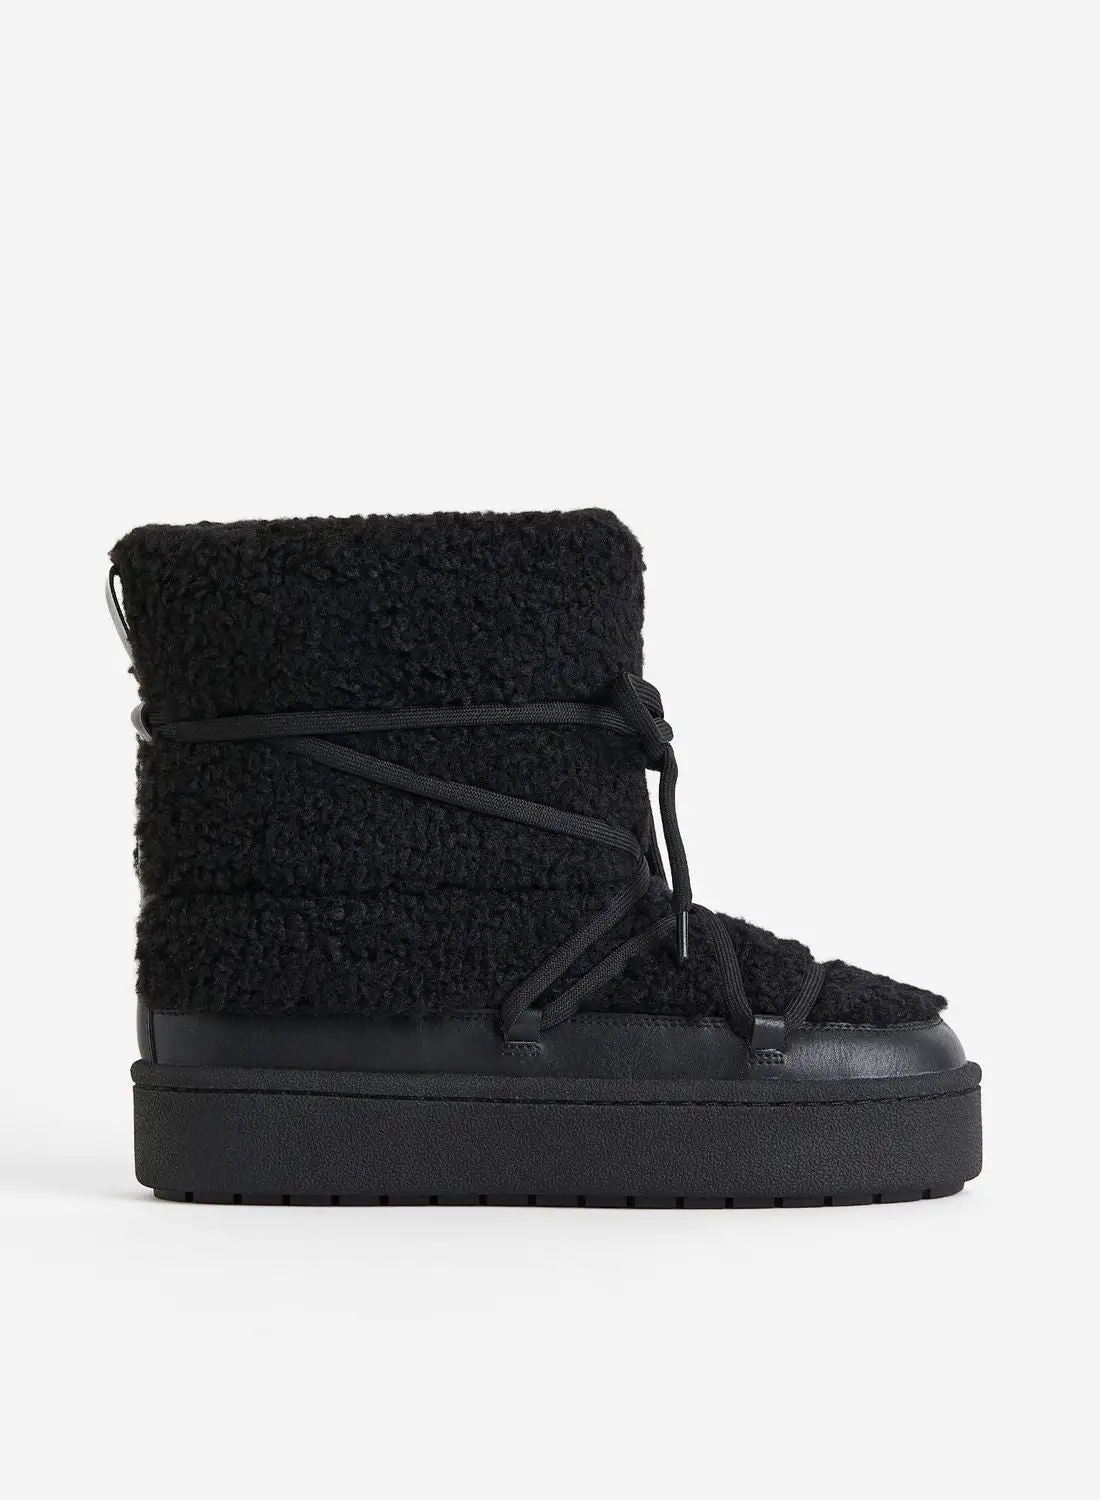 H&M Warm Lined Teddy Booties